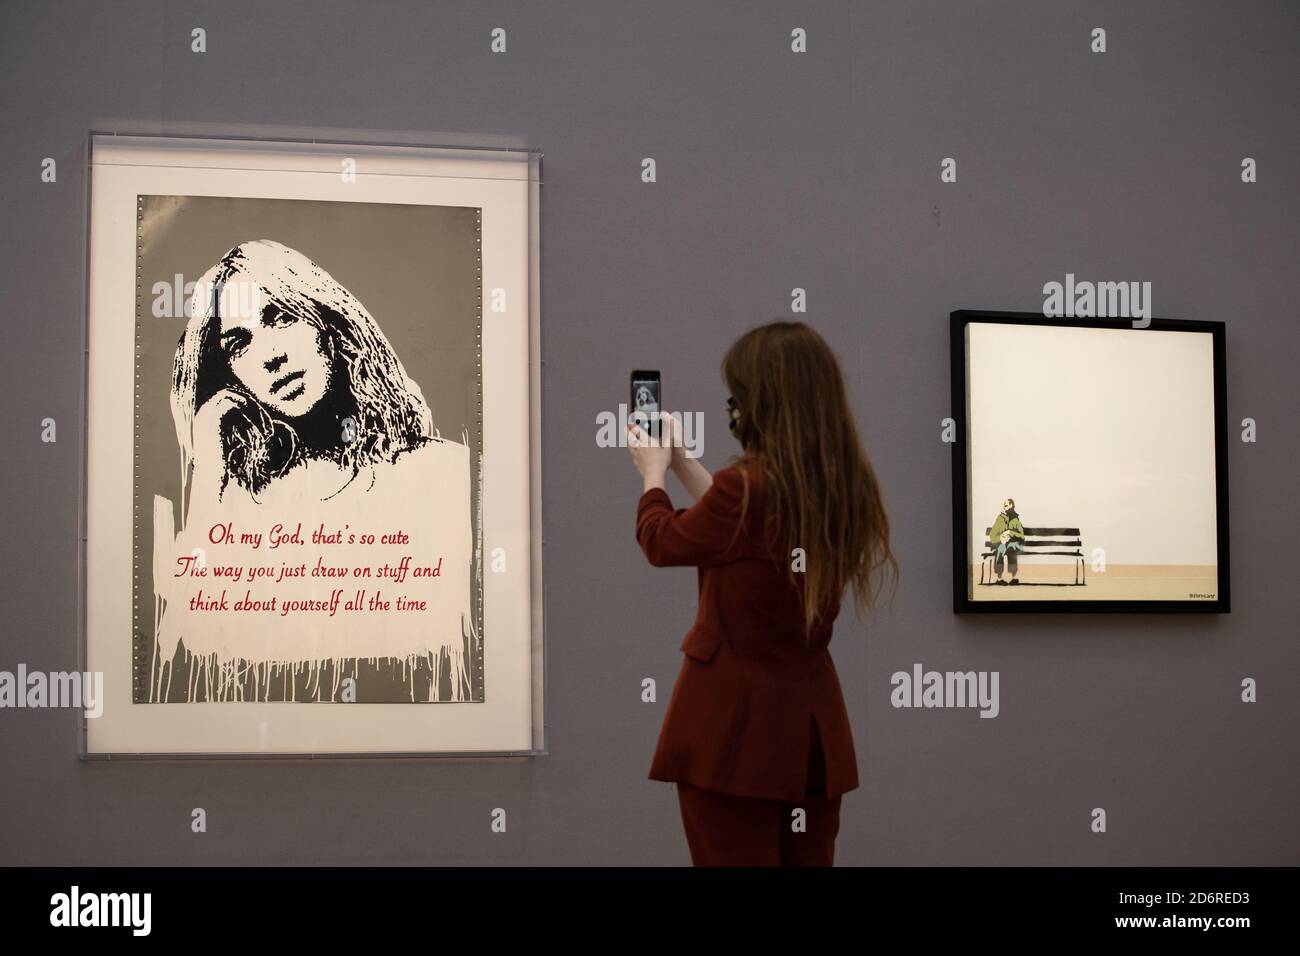 A gallery assistant takes a picture next to Oh My God 2006 by BANKSY (L) with a guide price of £700,000 to £1,000,000 and Weston Super Mare 1999 by BANKSY (R) with a guide price of £400,000-£600,000 at Bonhams in central London ahead of the auction house's forthcoming Post-War and Contemporary Art sale on October 22. Stock Photo